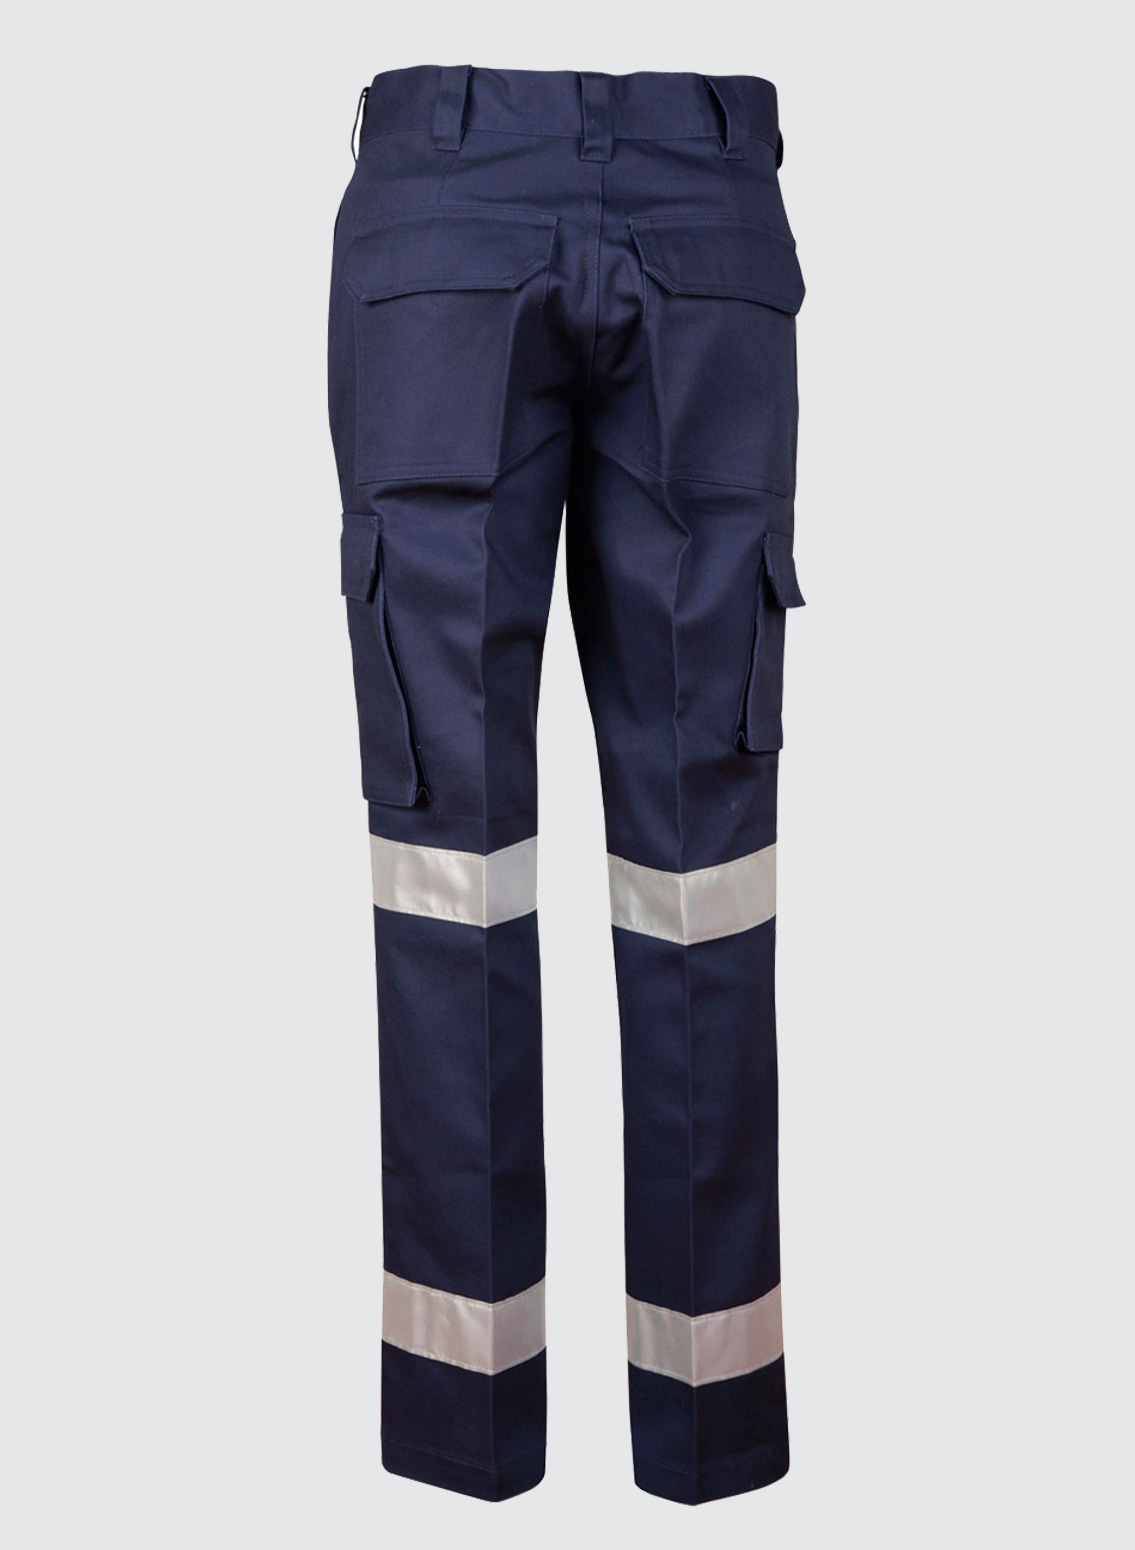 WP13HV PRE-SHRUNK DRILL PANTS WITH 3M TAPES Long Leg